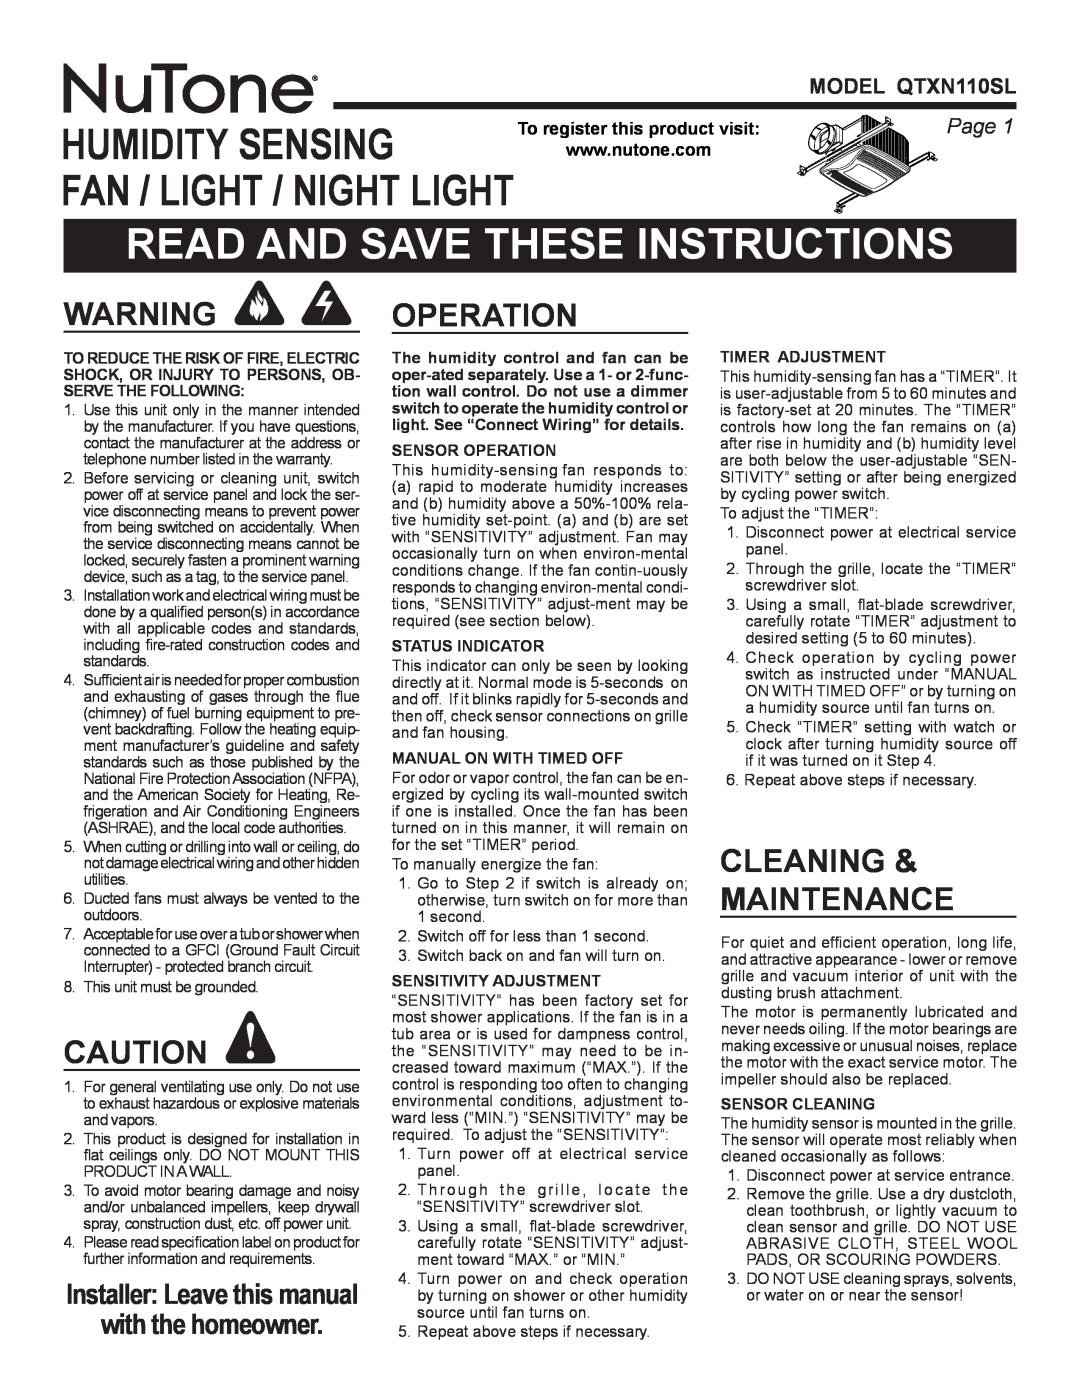 NuTone QTXN110SL manual Read And Save These Instructions, Operation, Cleaning & Maintenance, with the homeowner 